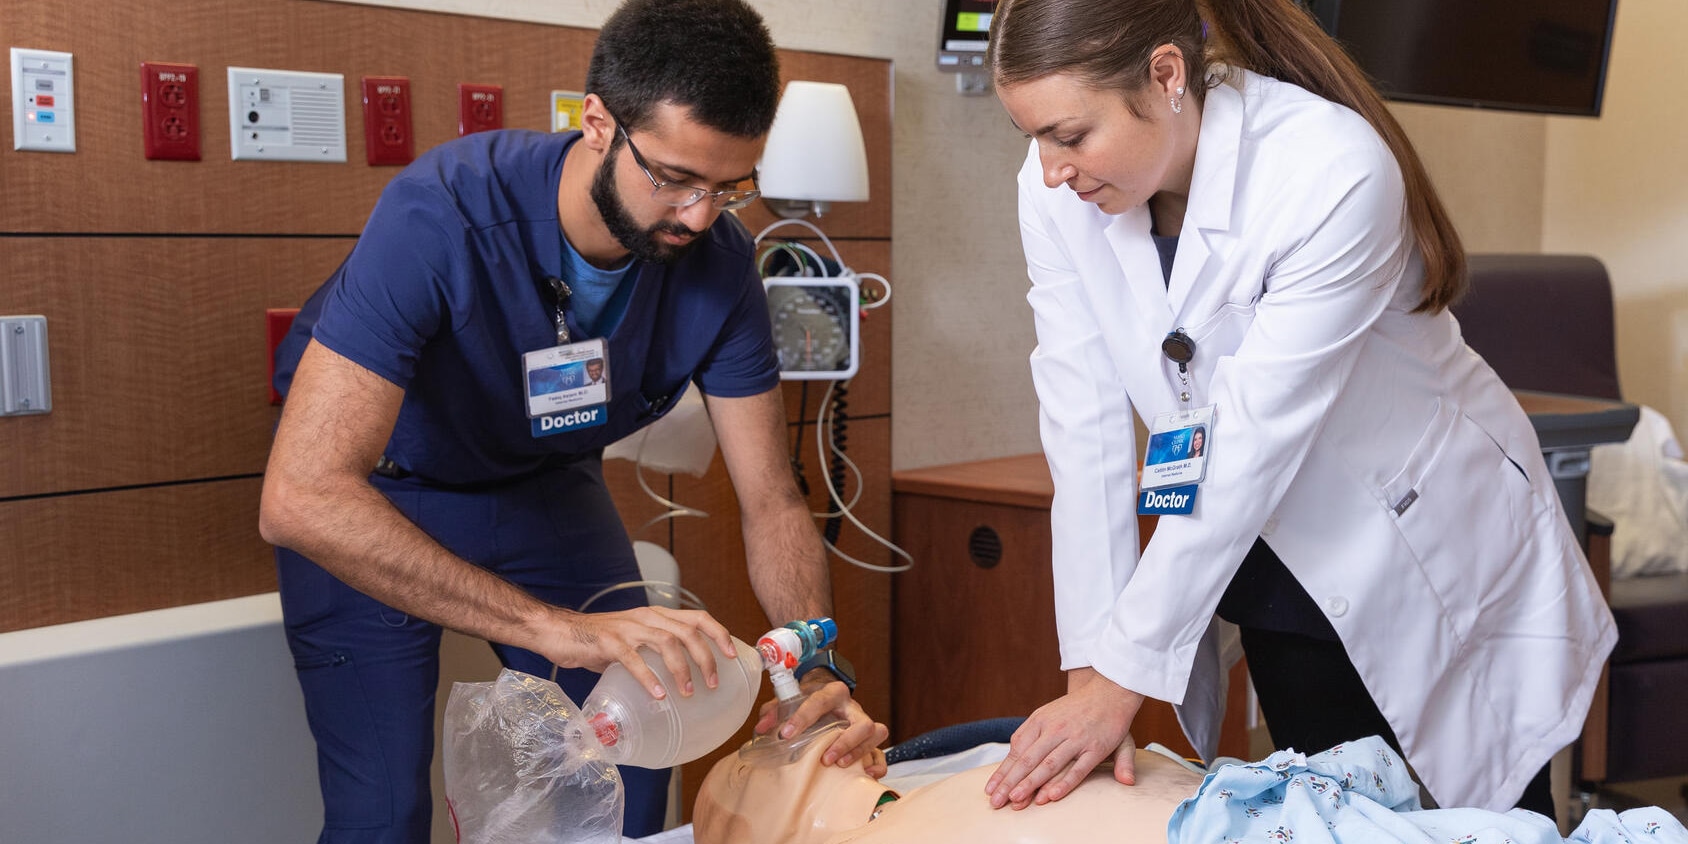 Internal medicine residents practice life-saving techniques on a simulated patient at Mayo Clinic